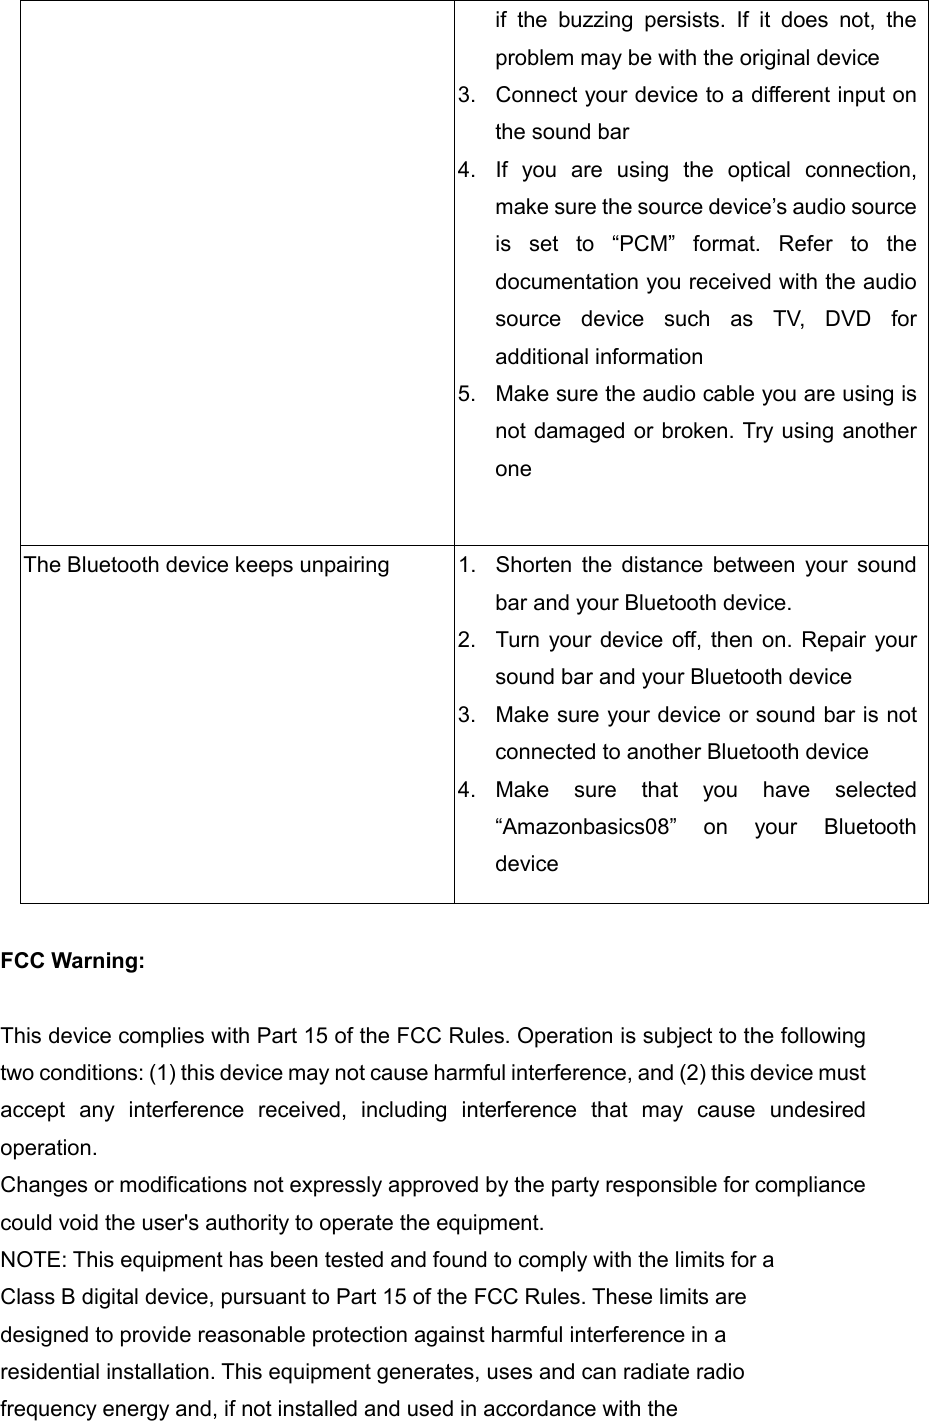 if  the  buzzing  persists.  If  it  does  not,  the problem may be with the original device 3.  Connect your device to a different input on the sound bar 4.  If  you  are  using  the  optical  connection, make sure the source device’s audio source is  set  to  “PCM”  format.  Refer  to  the documentation you received with the audio source  device  such  as  TV,  DVD  for additional information   5.  Make sure the audio cable you are using is not damaged or broken. Try using another one  The Bluetooth device keeps unpairing  1.  Shorten  the  distance  between  your  sound bar and your Bluetooth device. 2.  Turn your device off, then on. Repair your sound bar and your Bluetooth device 3.  Make sure your device or sound bar is not connected to another Bluetooth device 4.  Make  sure  that  you  have  selected “Amazonbasics08”  on  your  Bluetooth device  FCC Warning:    This device complies with Part 15 of the FCC Rules. Operation is subject to the following two conditions: (1) this device may not cause harmful interference, and (2) this device must accept  any  interference  received,  including  interference  that  may  cause  undesired operation. Changes or modifications not expressly approved by the party responsible for compliance could void the user&apos;s authority to operate the equipment. NOTE: This equipment has been tested and found to comply with the limits for a Class B digital device, pursuant to Part 15 of the FCC Rules. These limits are designed to provide reasonable protection against harmful interference in a residential installation. This equipment generates, uses and can radiate radio frequency energy and, if not installed and used in accordance with the 